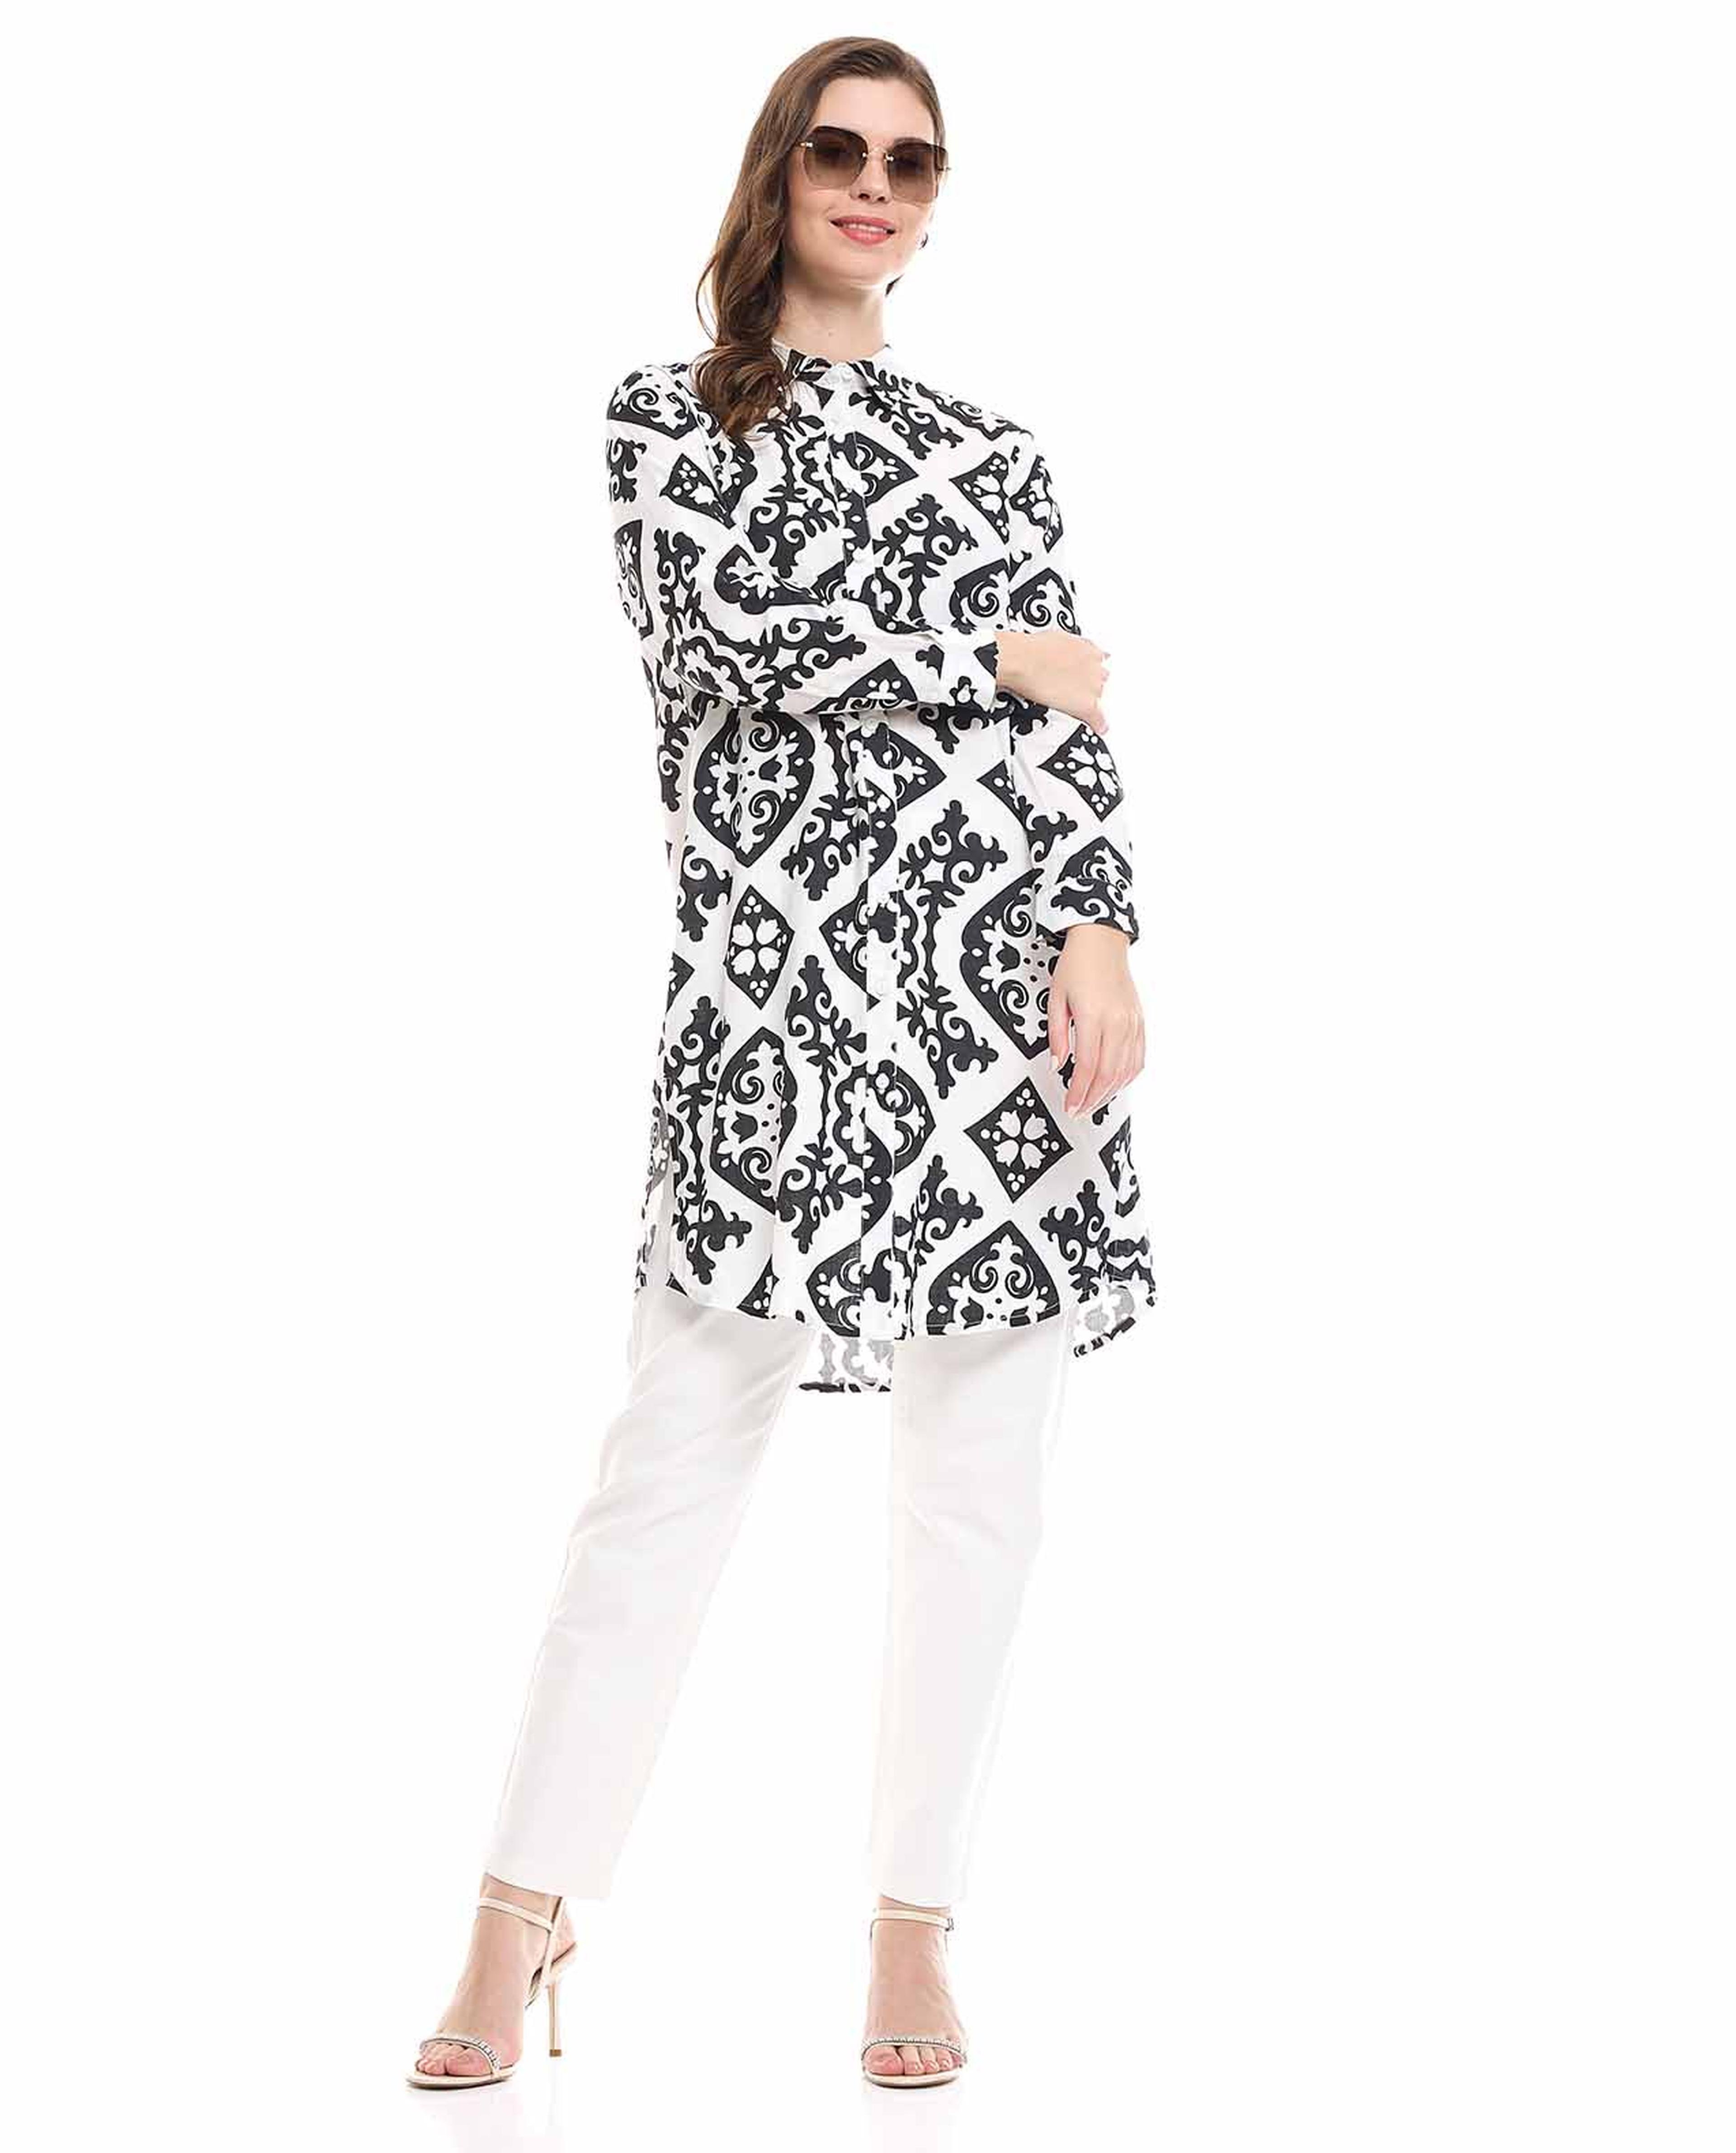 Patterned Tunic with Stand Collar and Long Sleeves